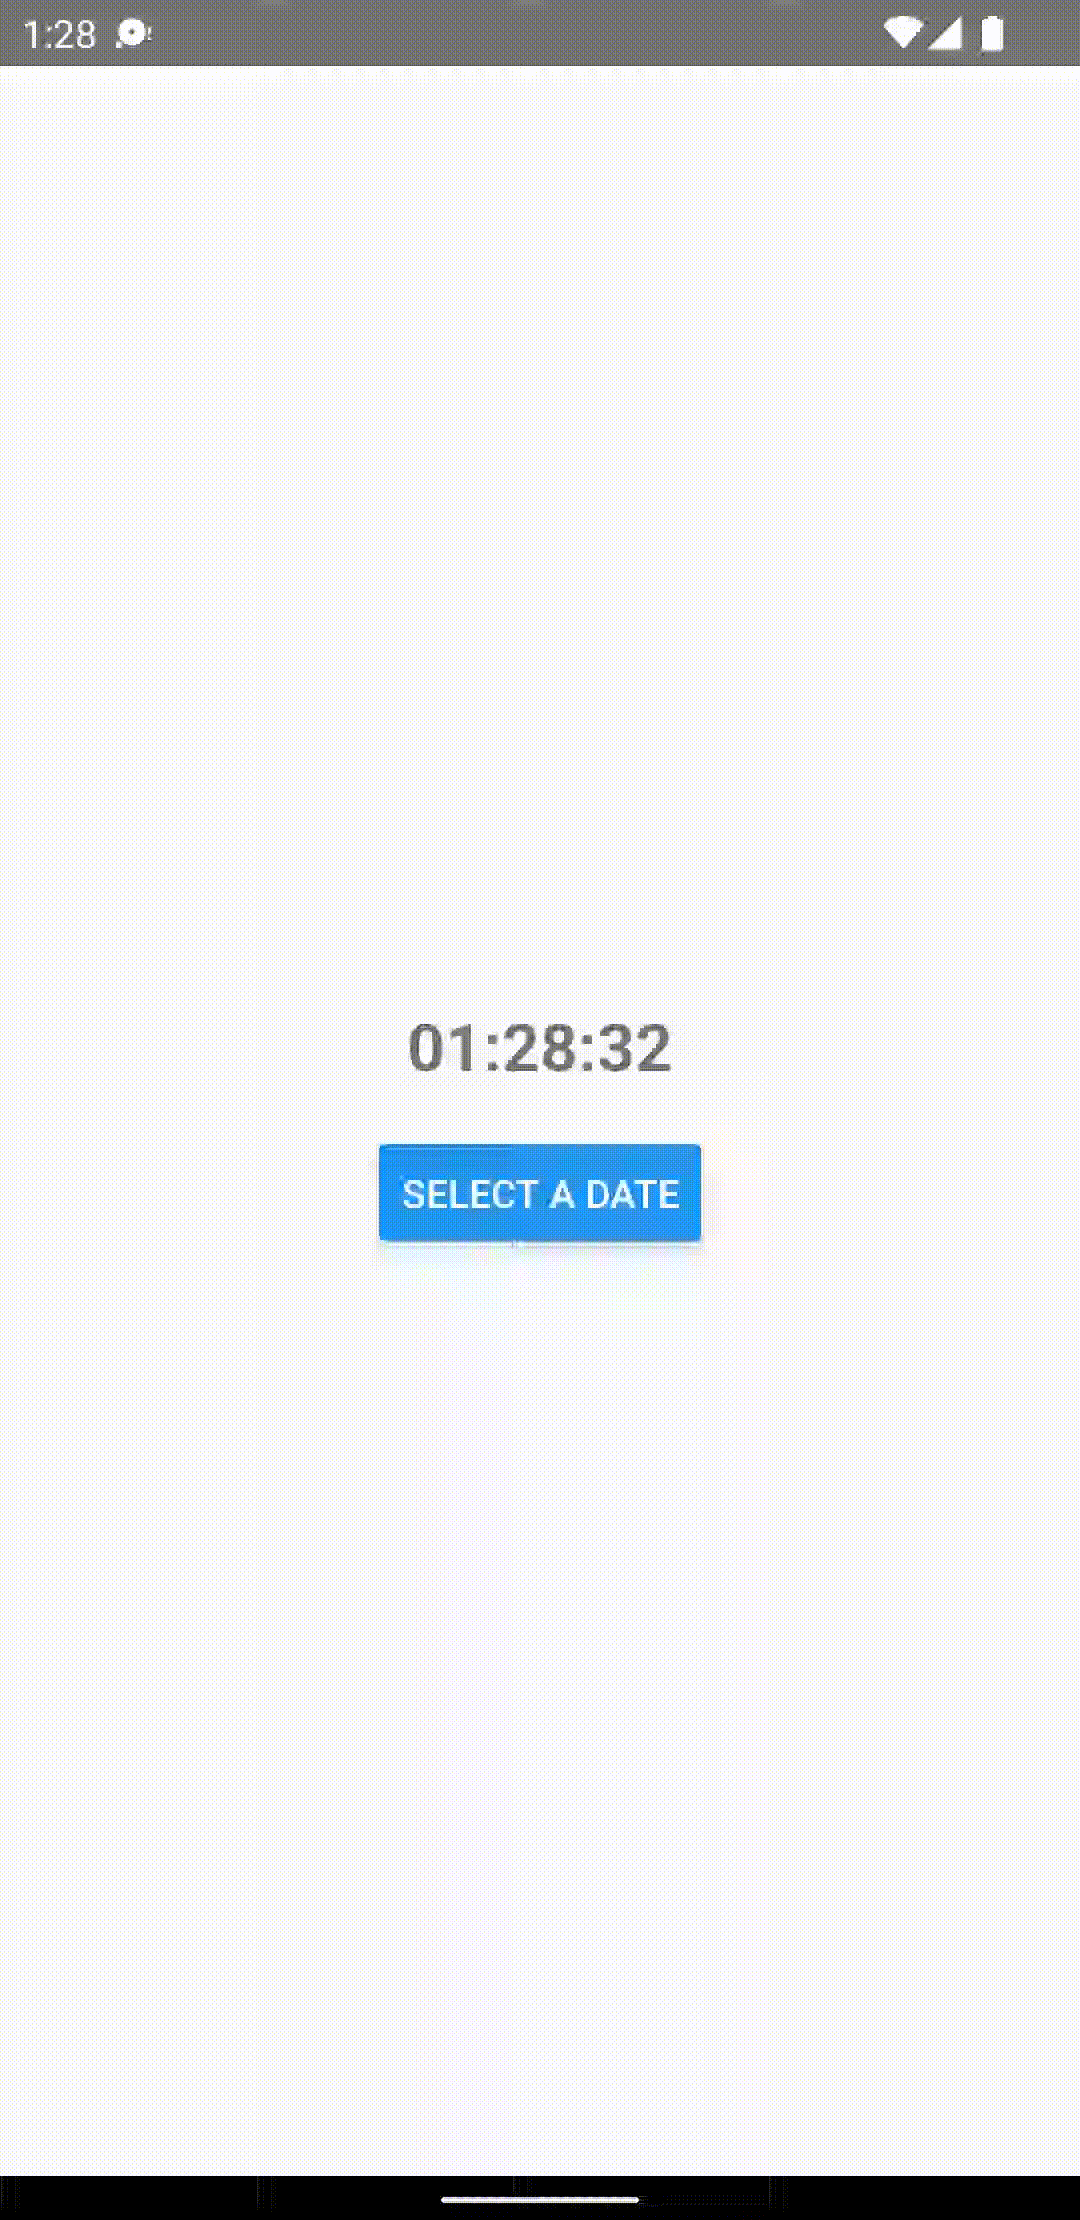 React Native Modal Datetime Picker - 24 hour time selection on Android